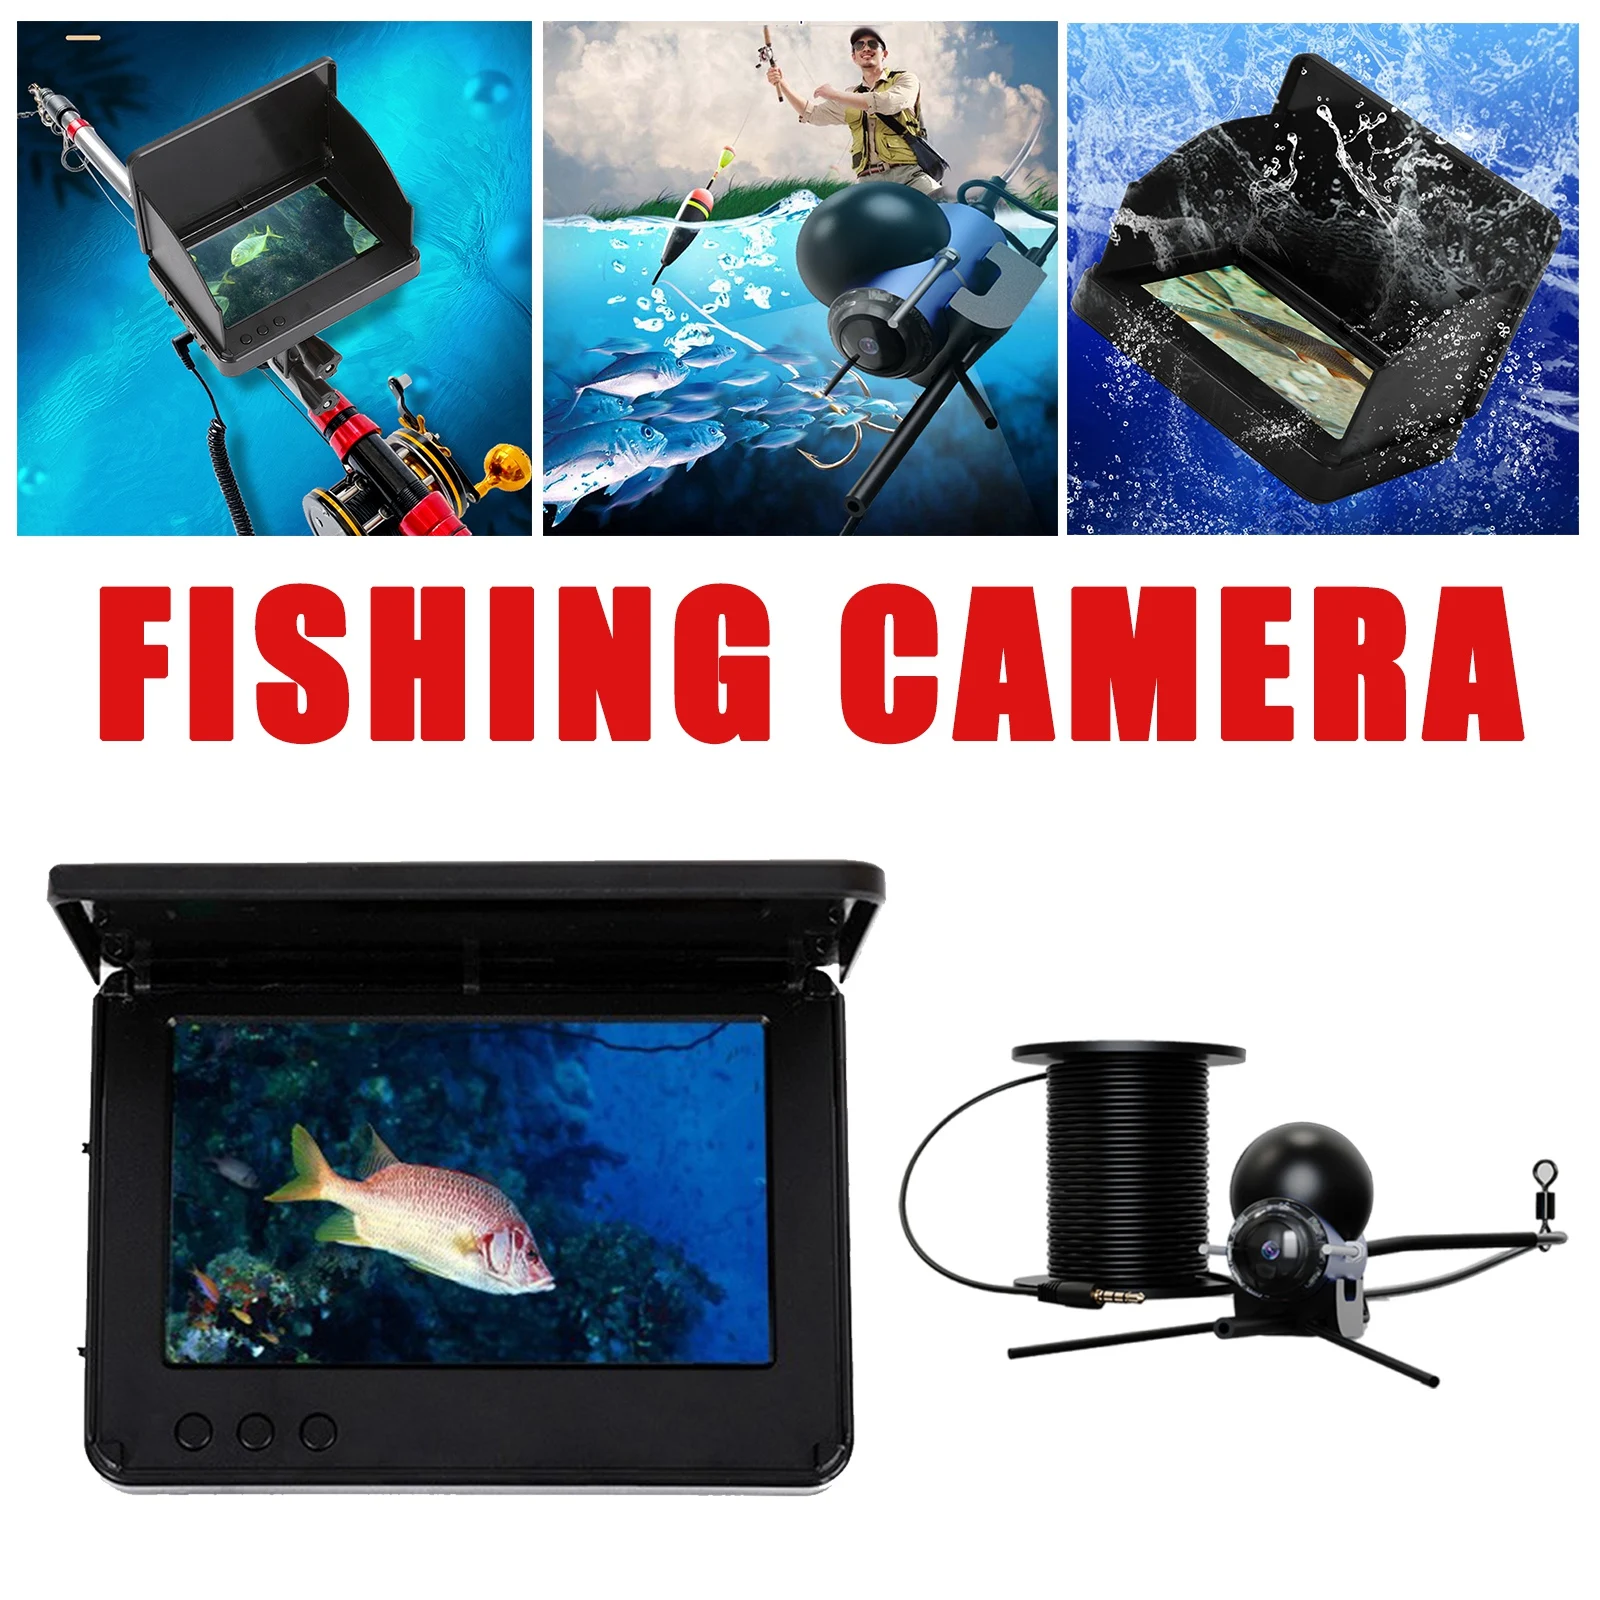 https://ae01.alicdn.com/kf/Sdca8f0f3da504769b32ca092da30b3c3n/Underwater-Fishing-Camera-HD-220-Wide-Angle-Infrared-Night-Vision-Black-Fishfinder-Color-Display-Outdoor-Fishing.jpg